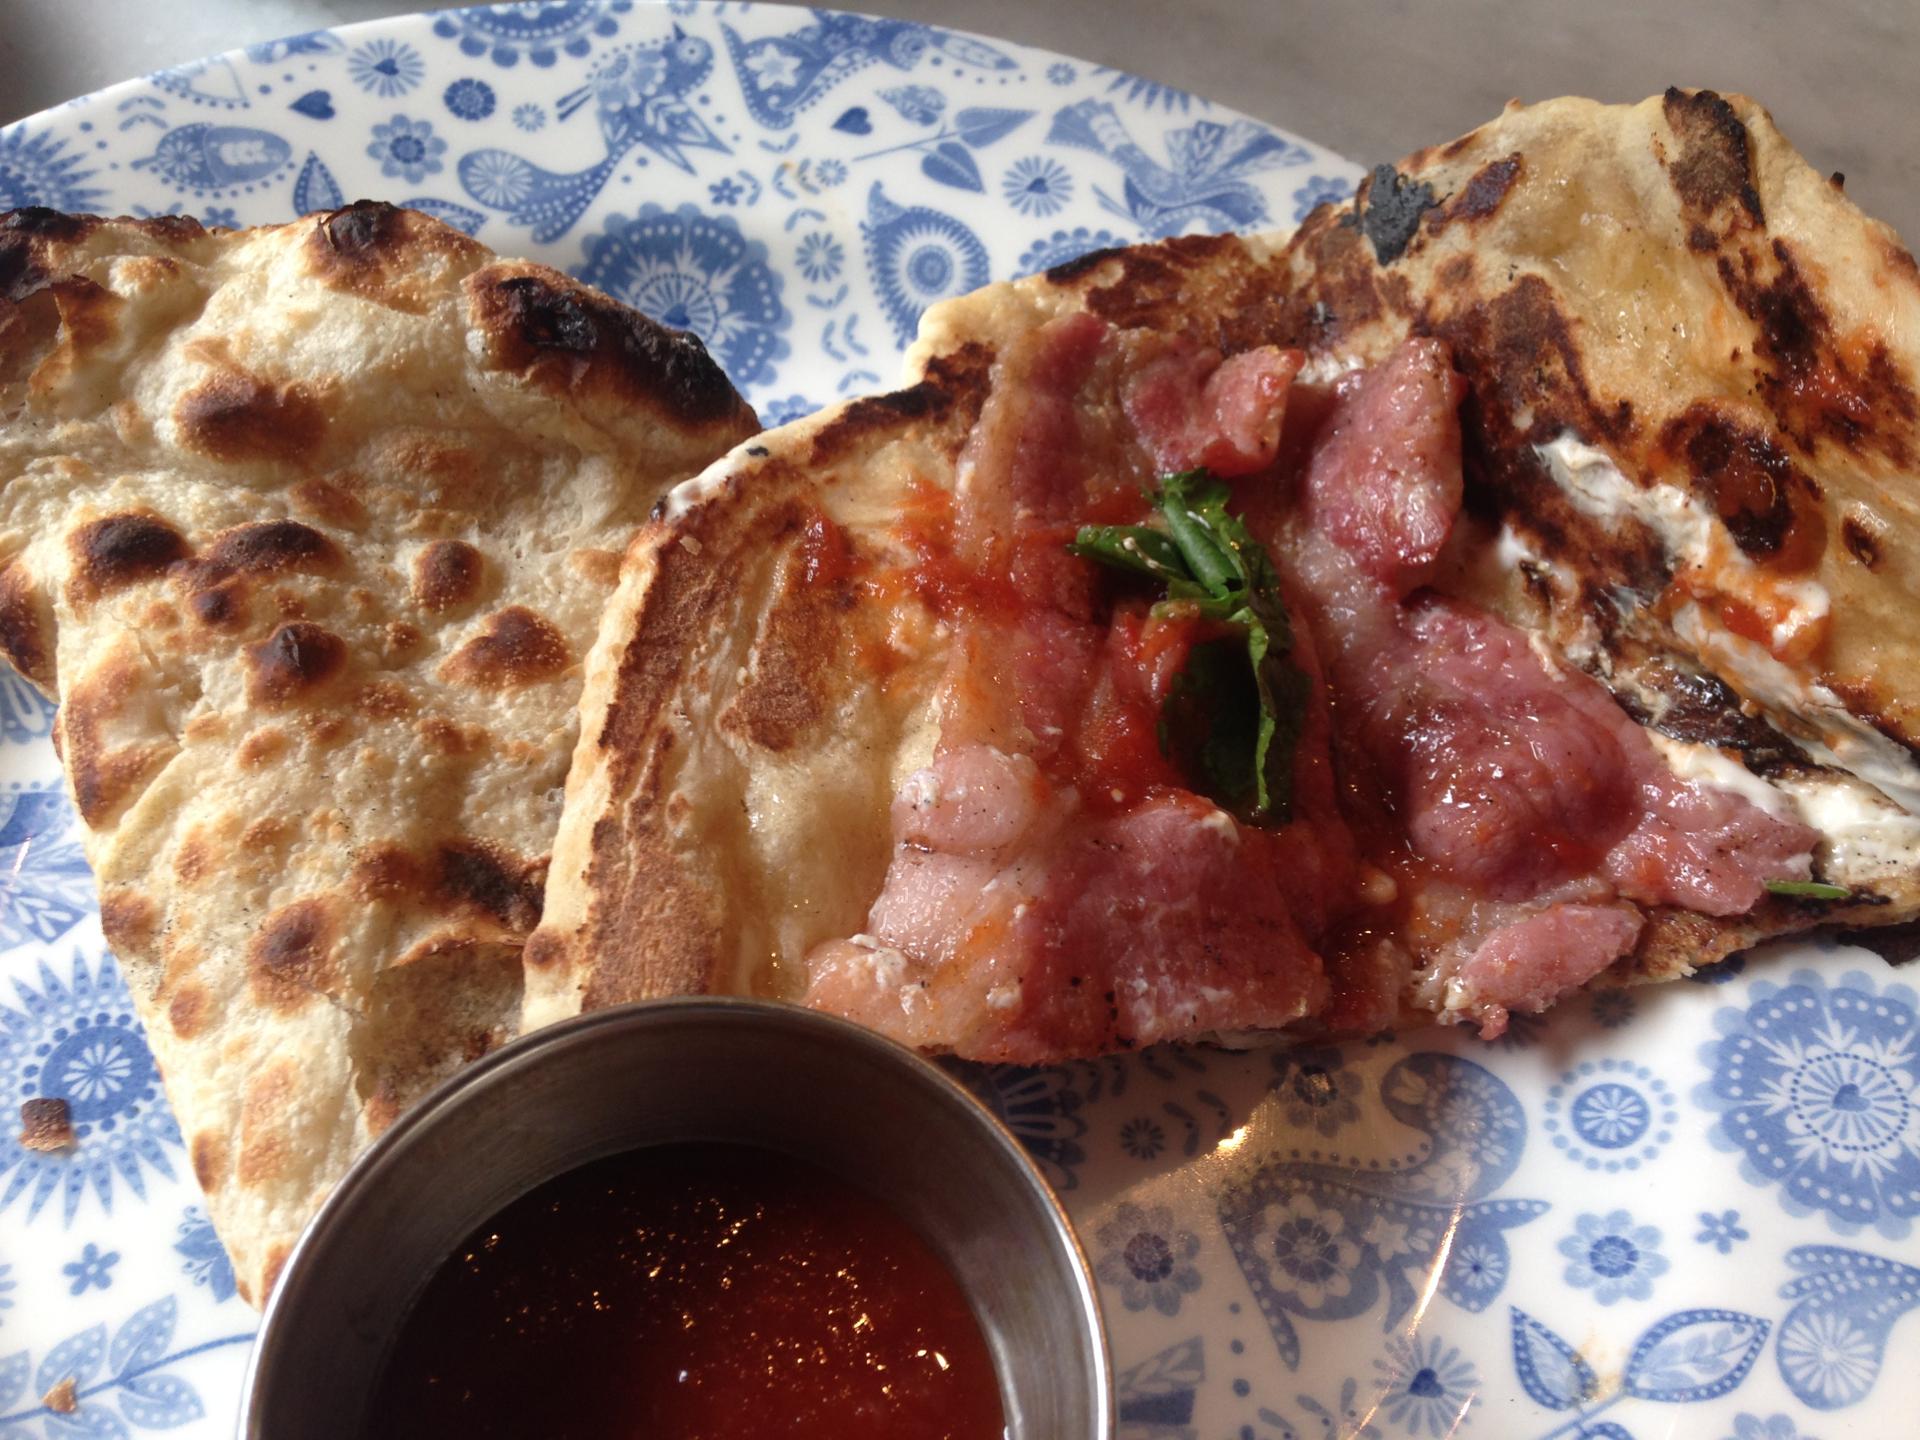 Bacon wrapped with naan bread at Dishoom cafe in London